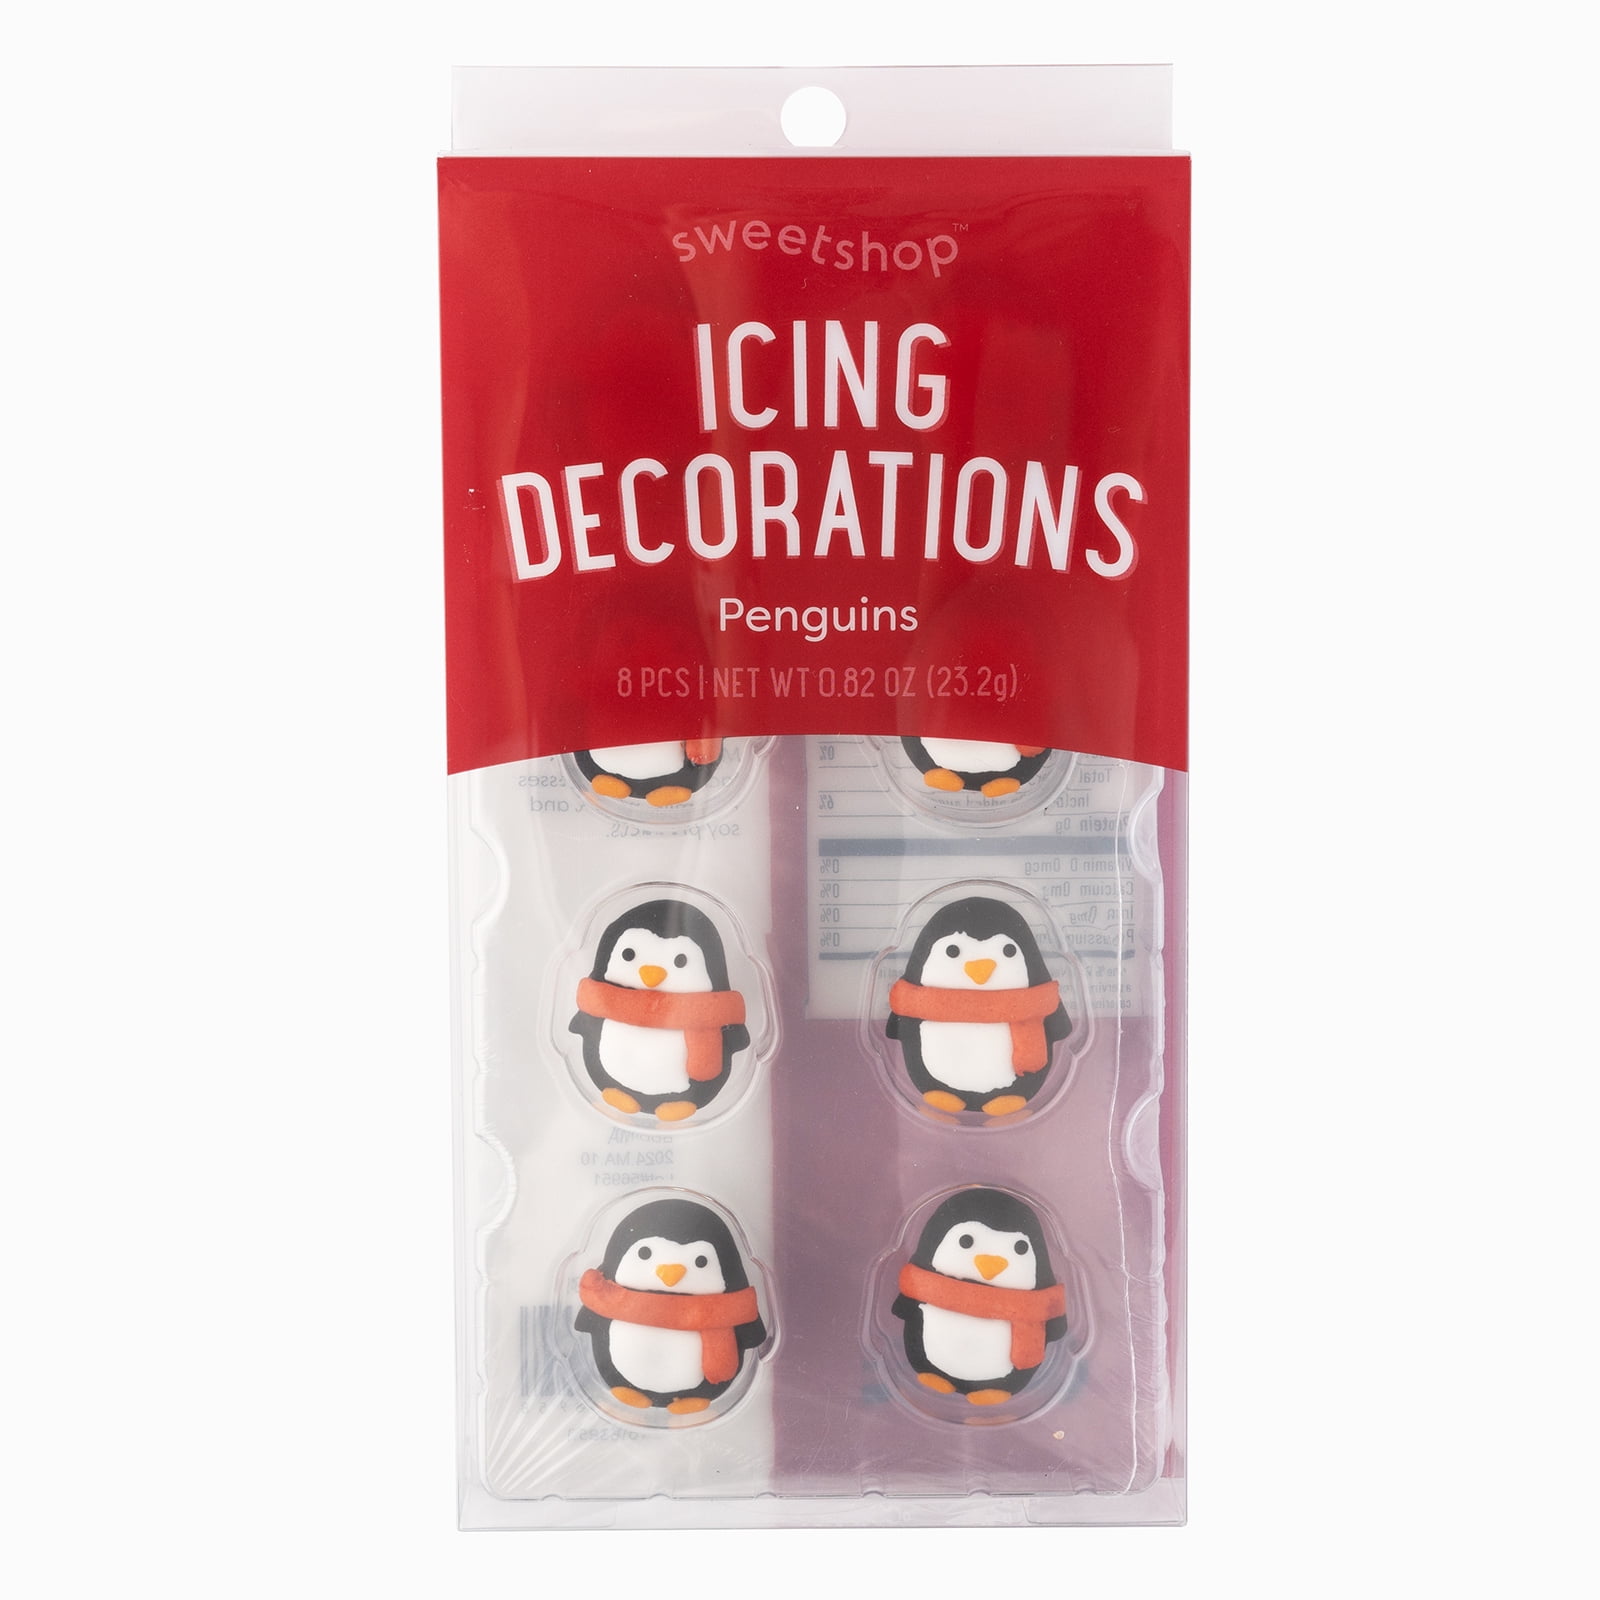 Sweetshop Icing Decorations - Penguin, 8 Piece Cake Toppers